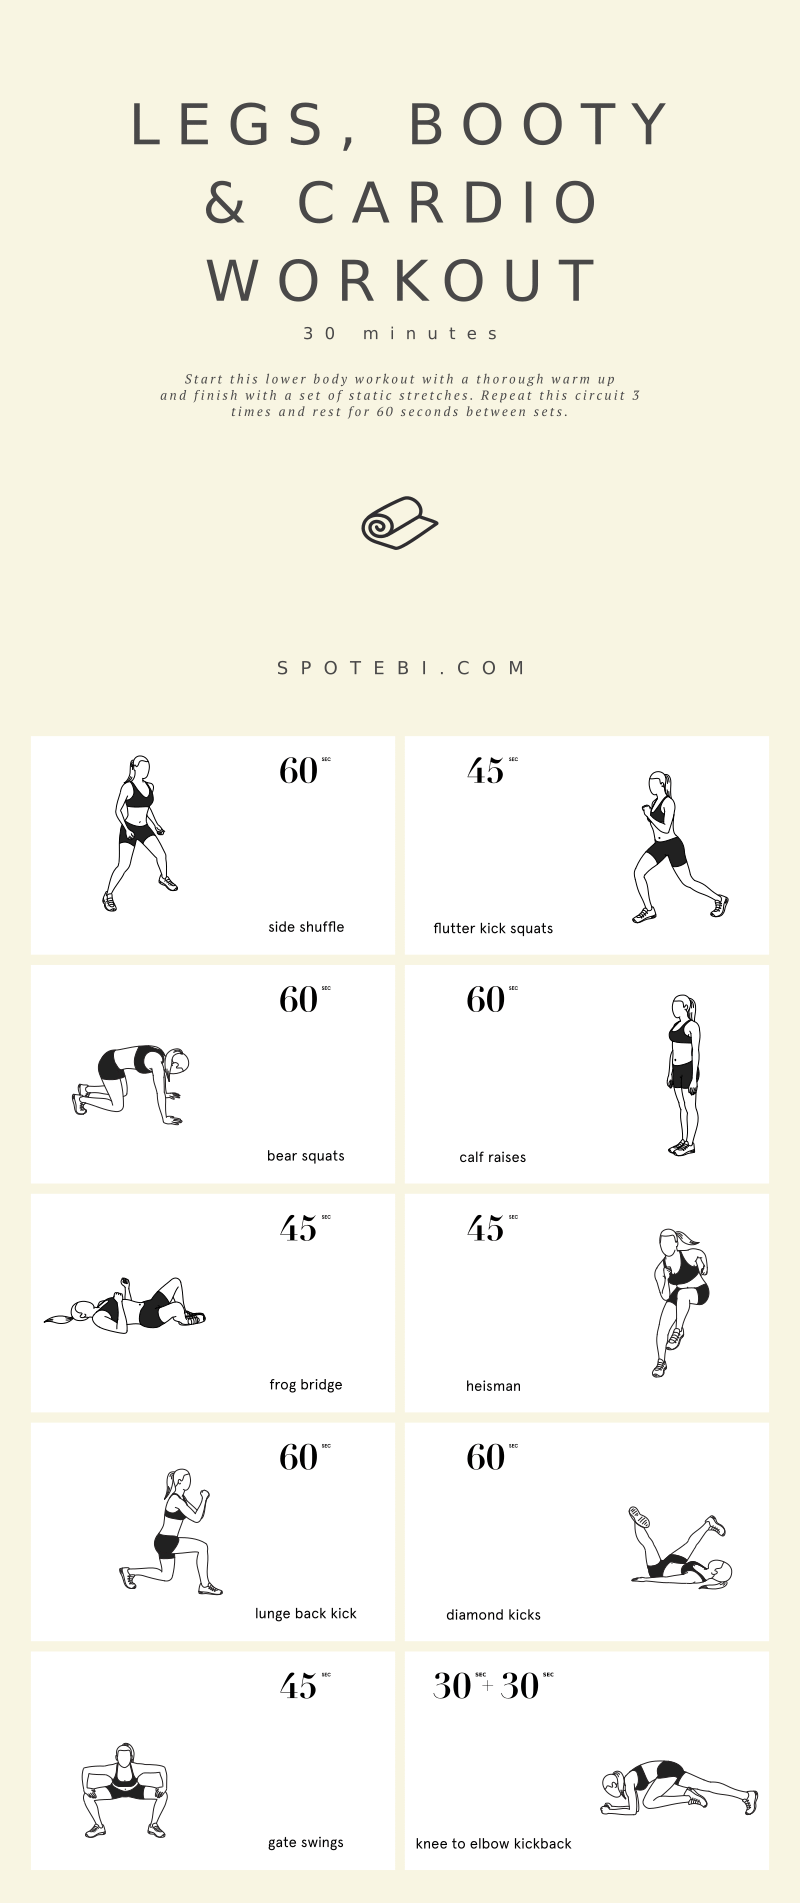 Work your legs and booty from all angles with this 29-minute bodyweight workout. A lower body and cardio routine that will help you sculpt long and lean muscles and burn off body fat. https://www.spotebi.com/workout-routines/legs-booty-cardio-bodyweight-workout/